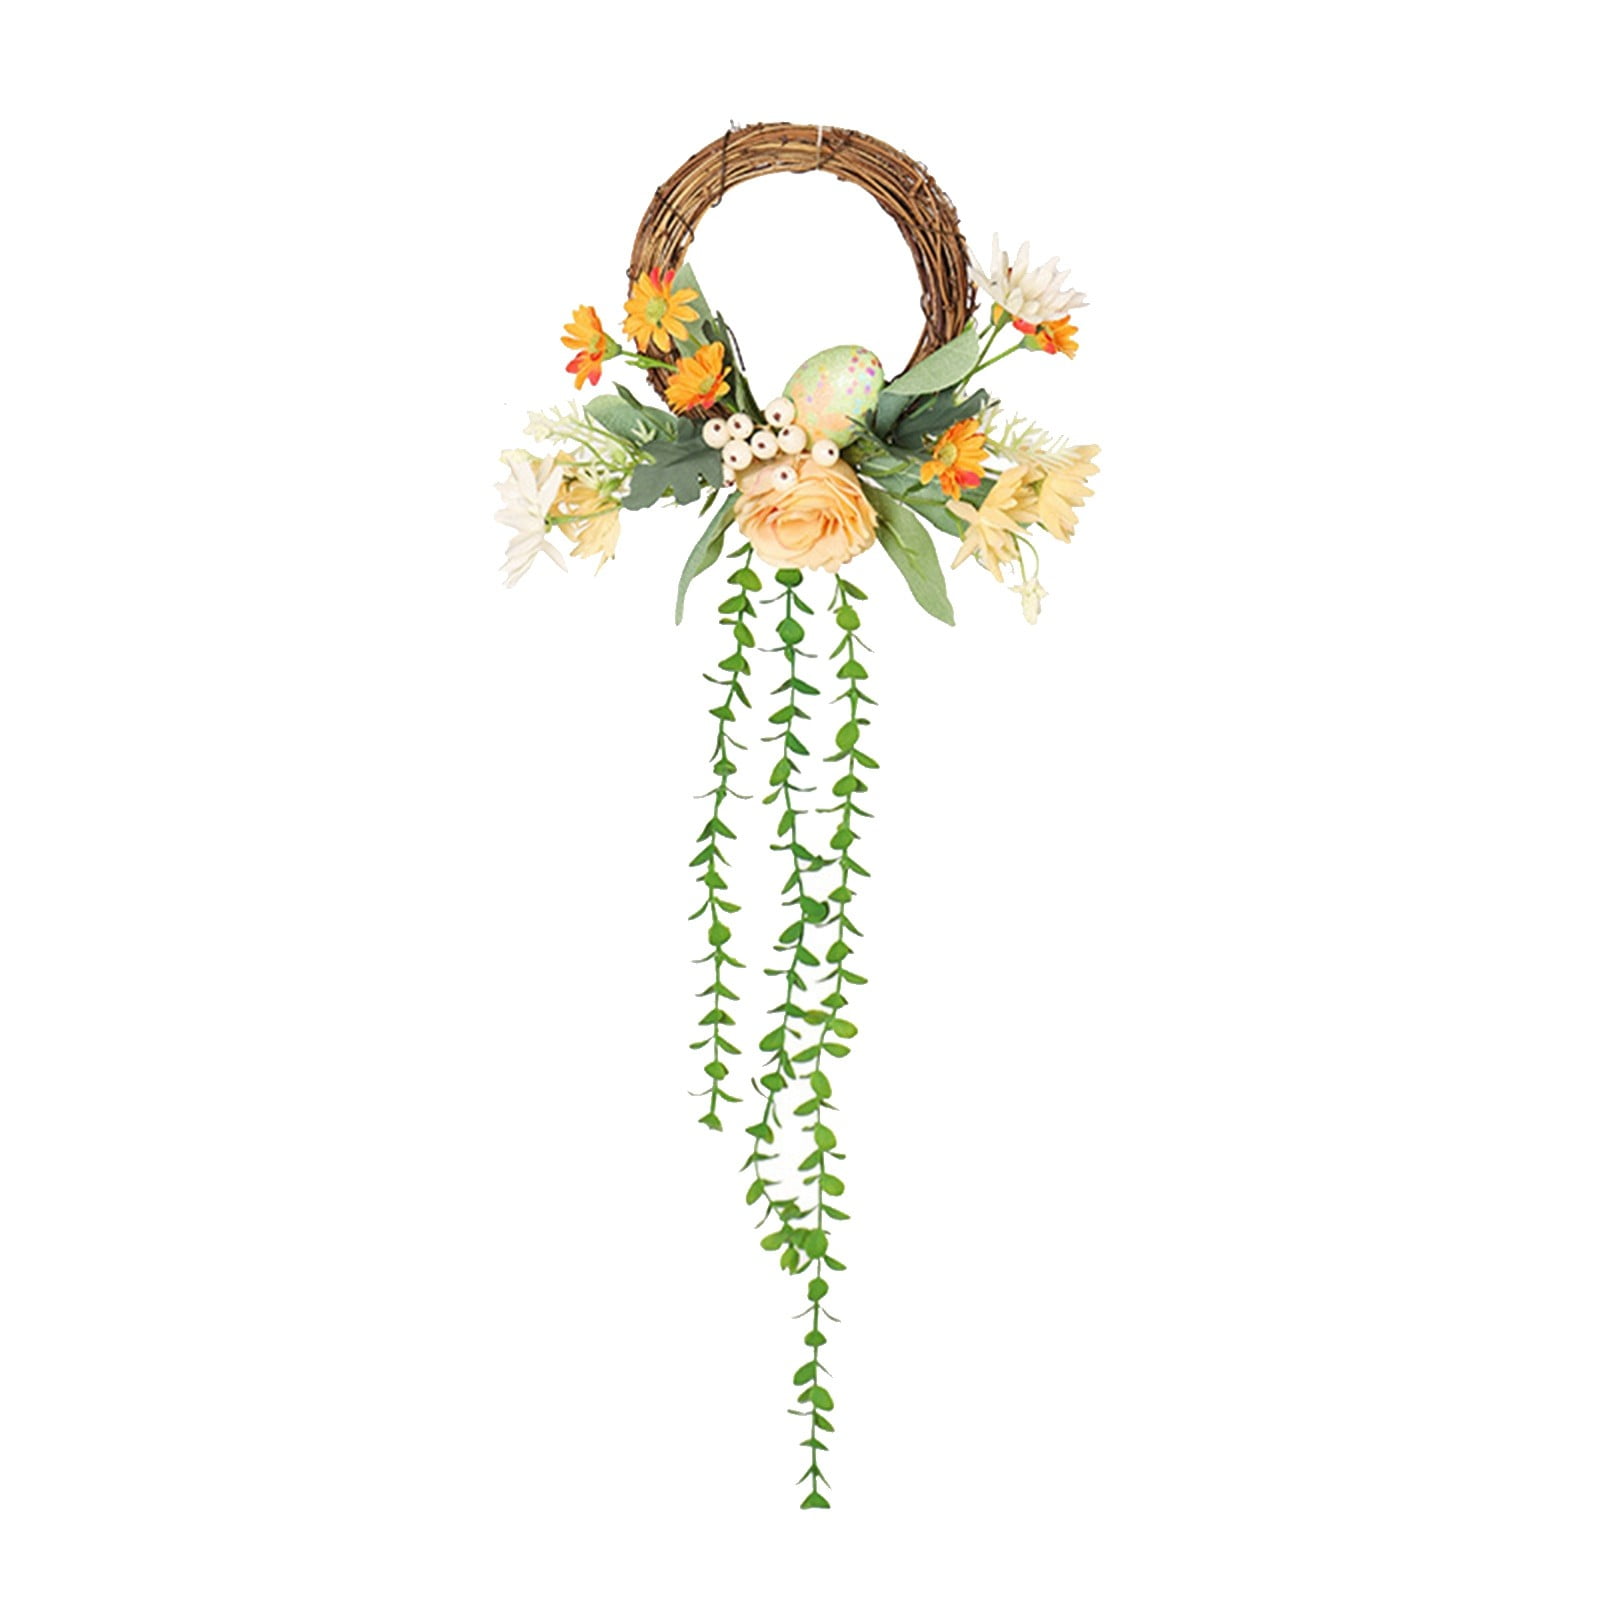 Oval Grapevine Wreath Easter Egg Wreath Rattan Ring Artificial Flower ...